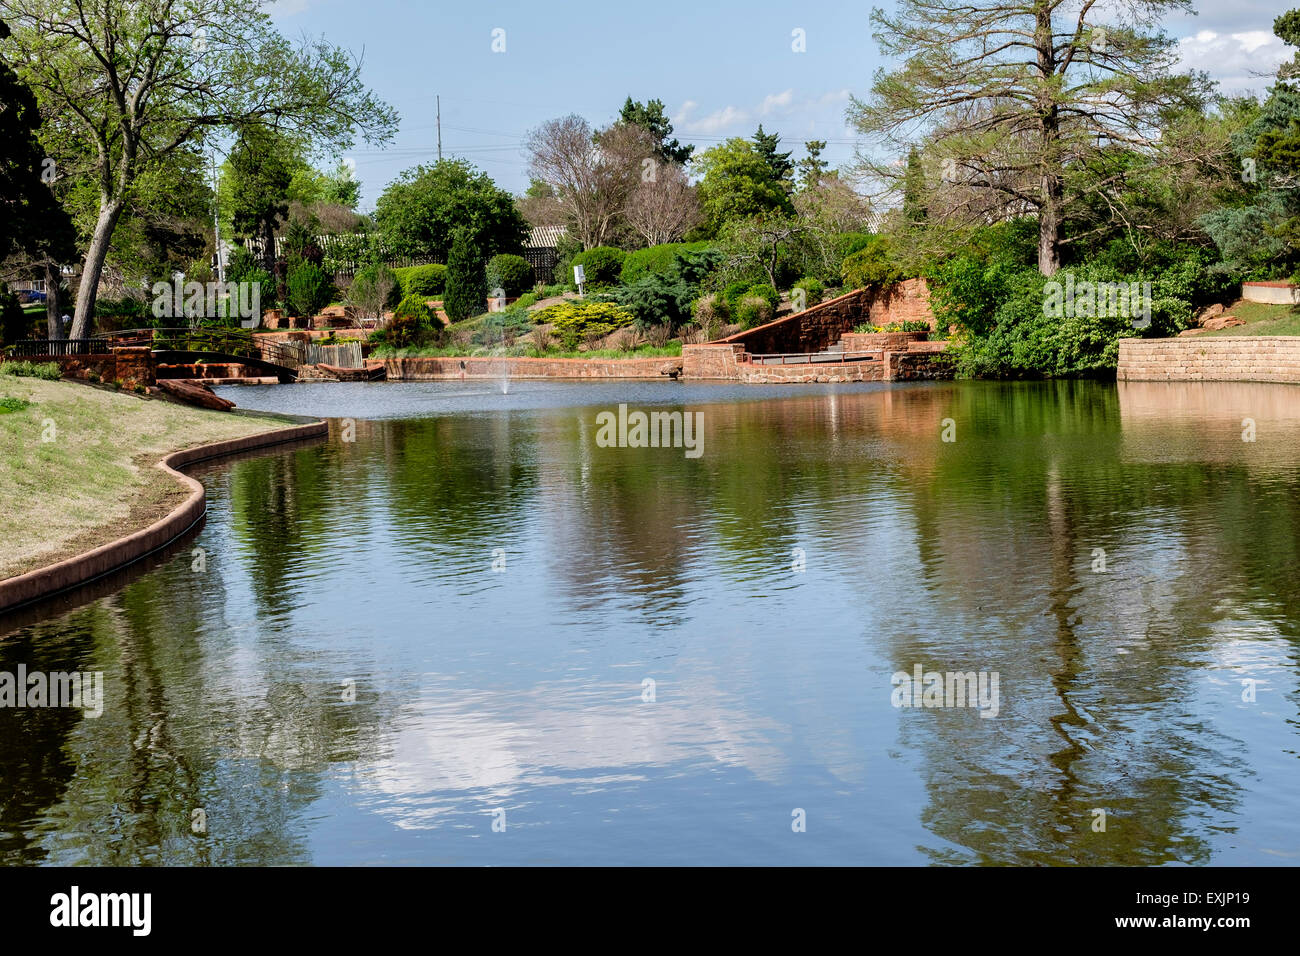 The Pond And Landscaping In Will Rogers Park In Oklahoma City Stock Photo Alamy